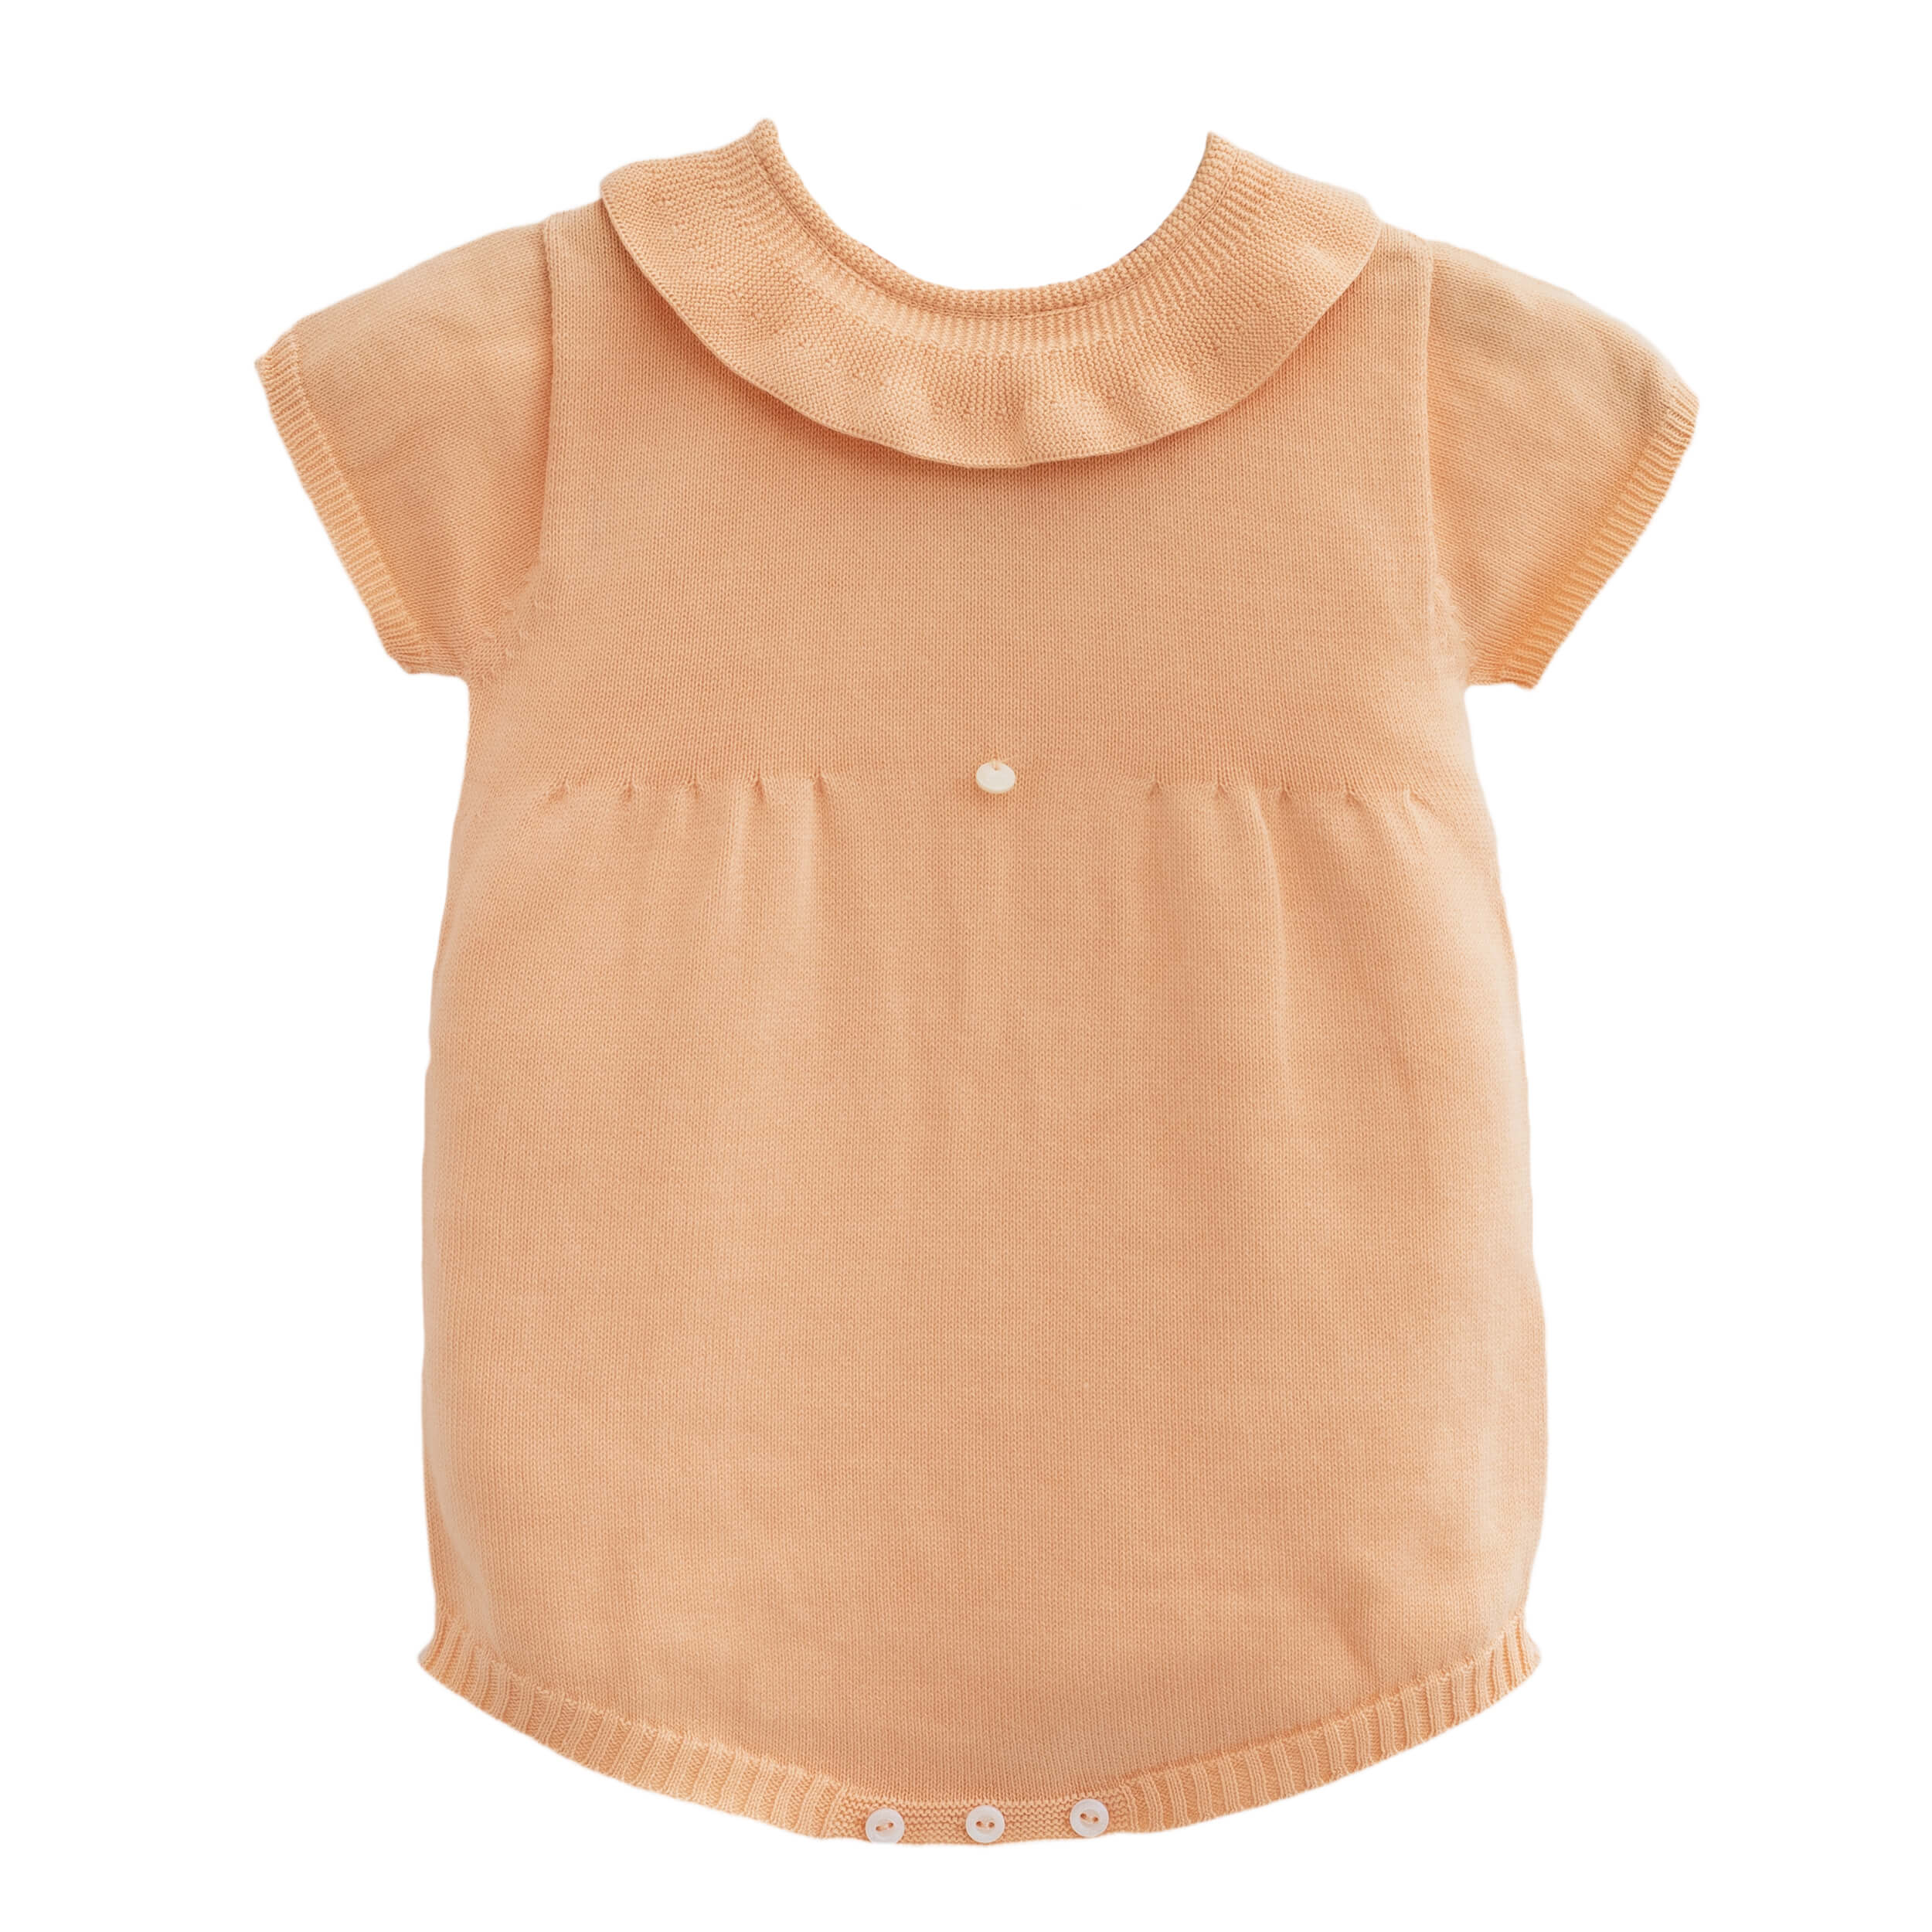 wedoble apricot knit baby romper